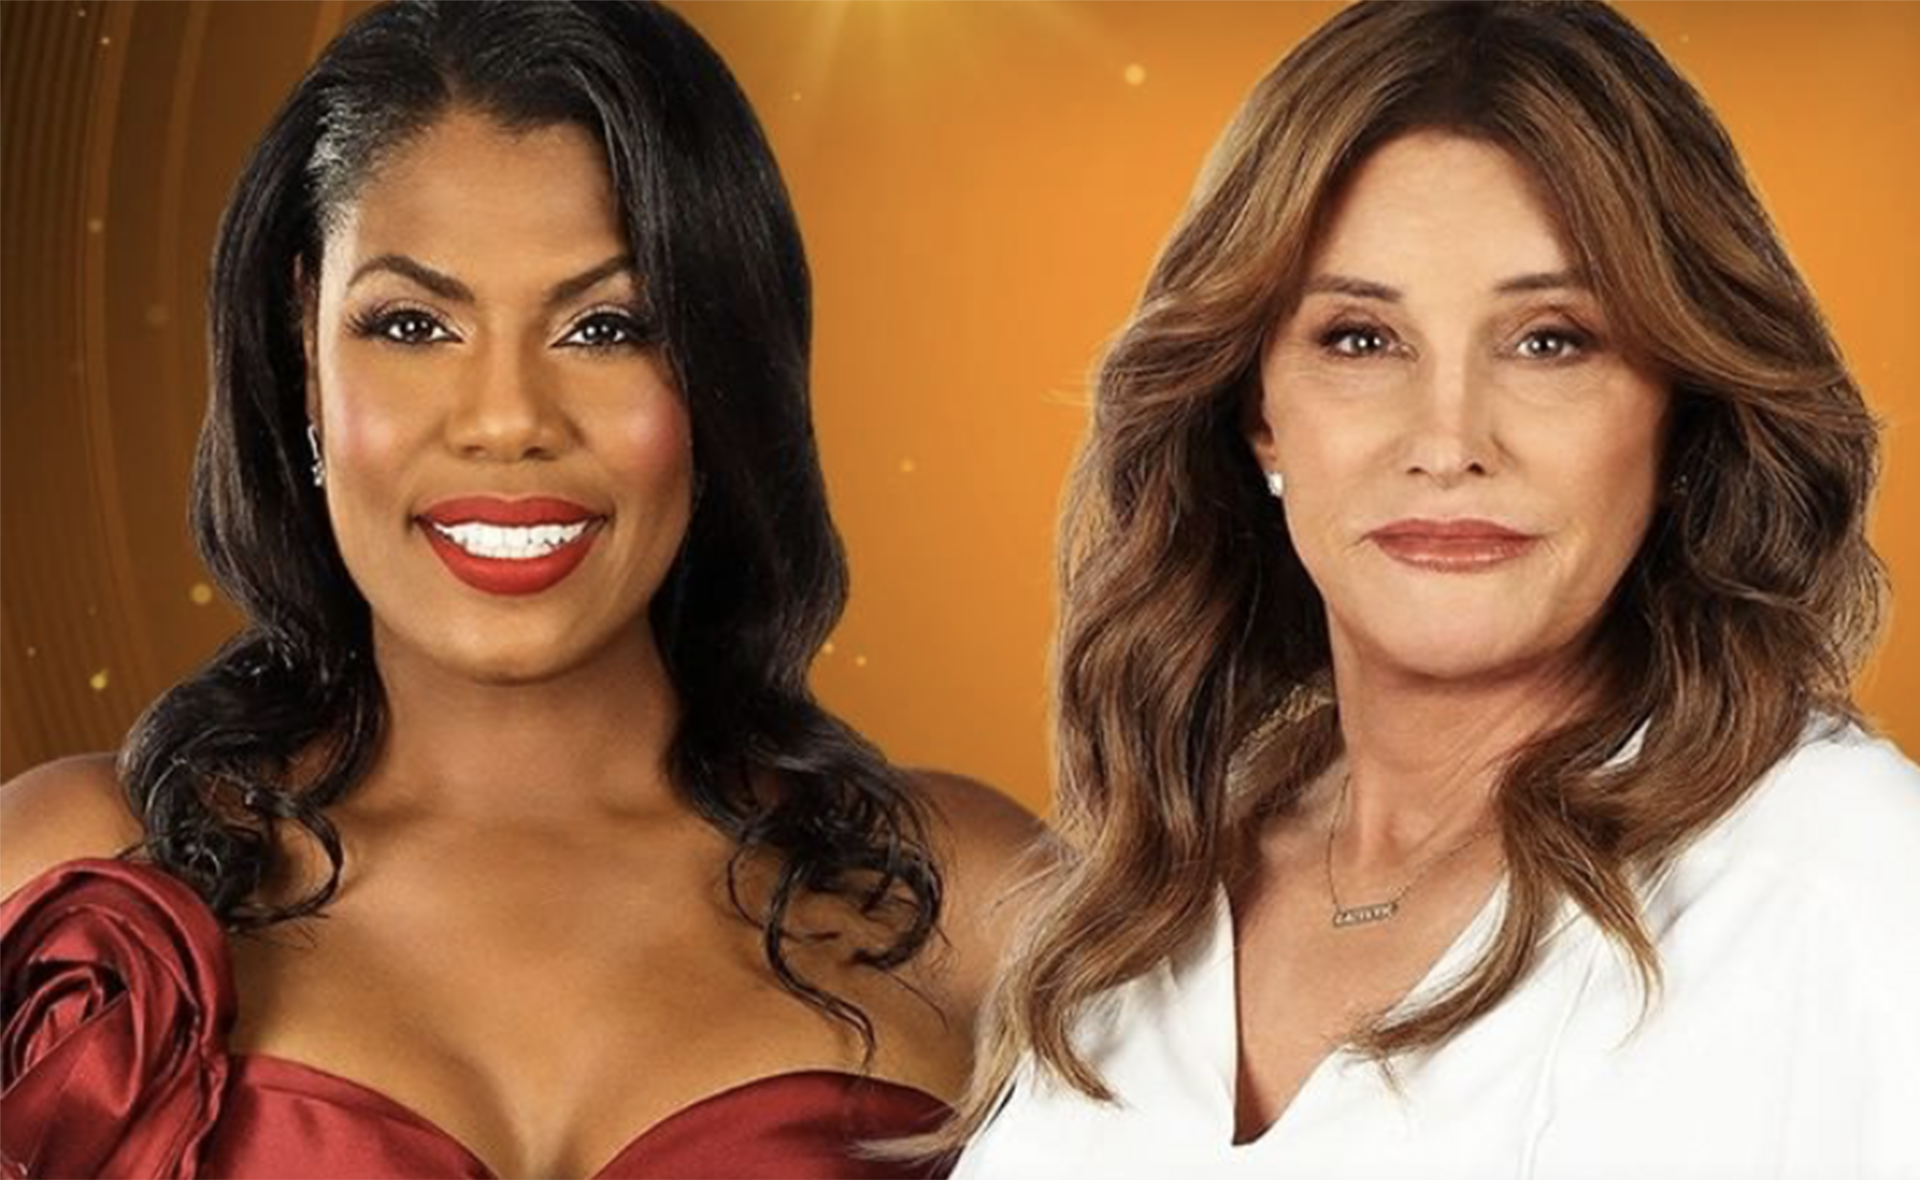 Big Brother VIP star Omarosa calls out Thomas Markle Jr and Caitlyn Jenner: “She was just terrible, it was shocking”